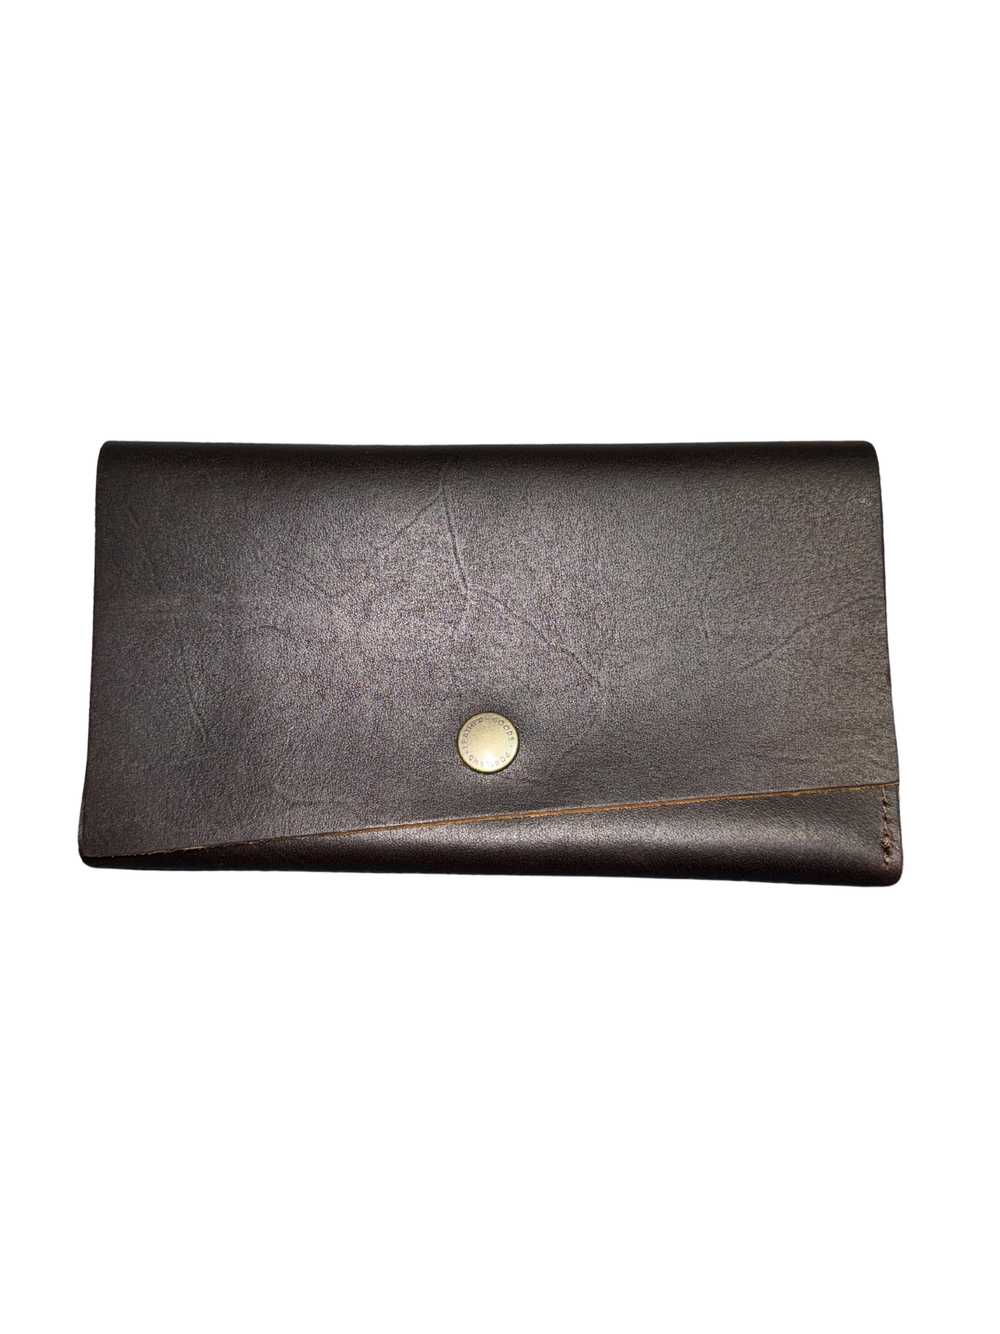 Portland Leather Leather Rancher Wallet - image 1